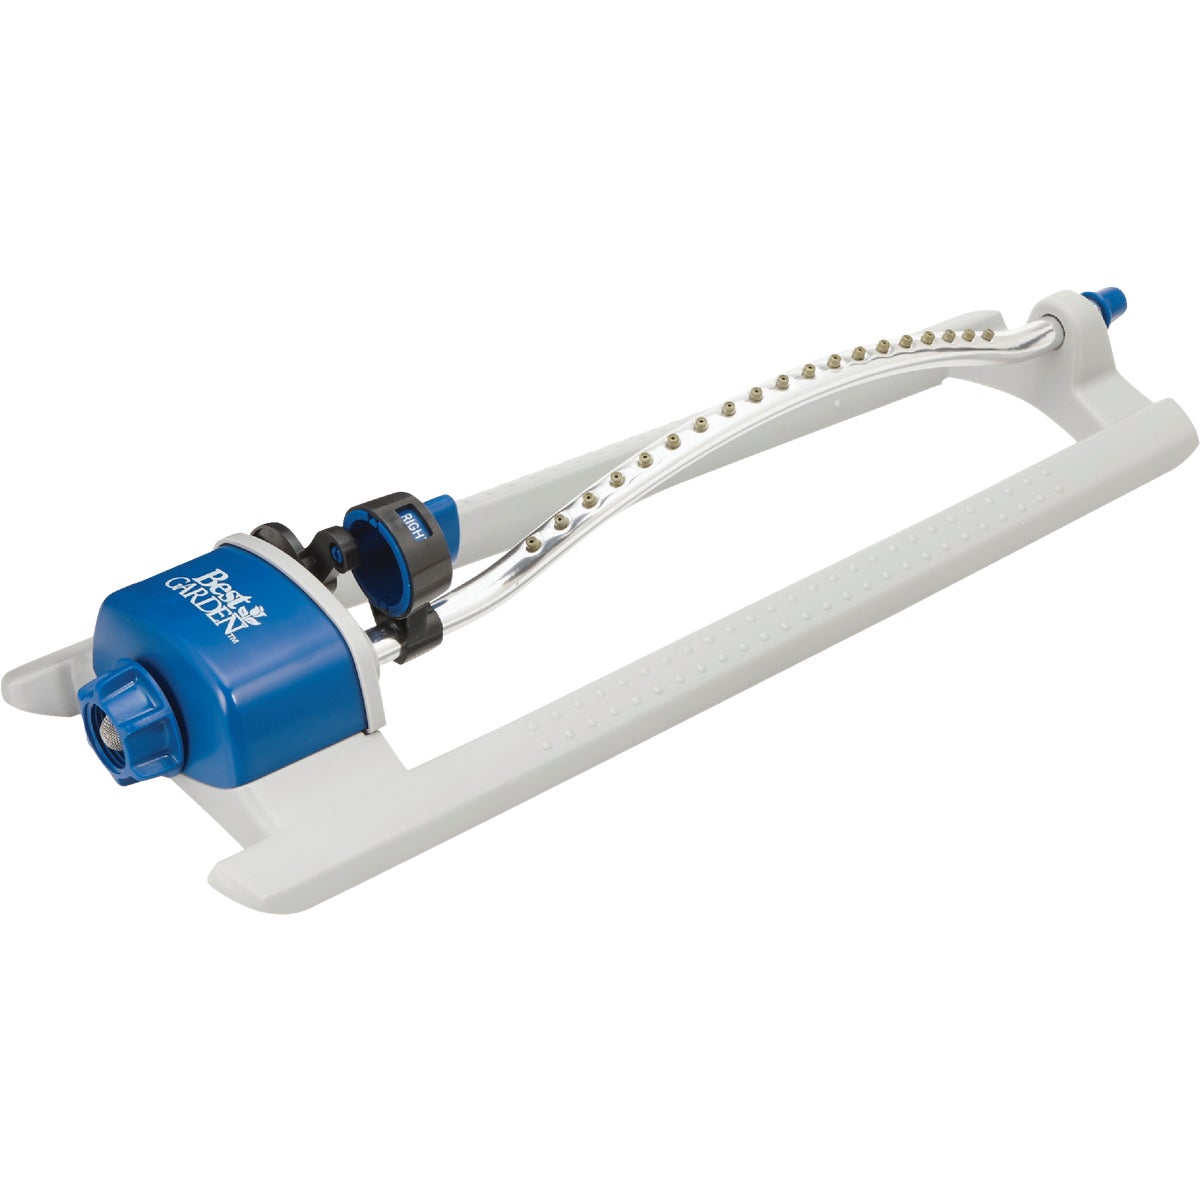 Item 724327, Poly oscillating sprinkler ideal for watering large, rectangular areas.